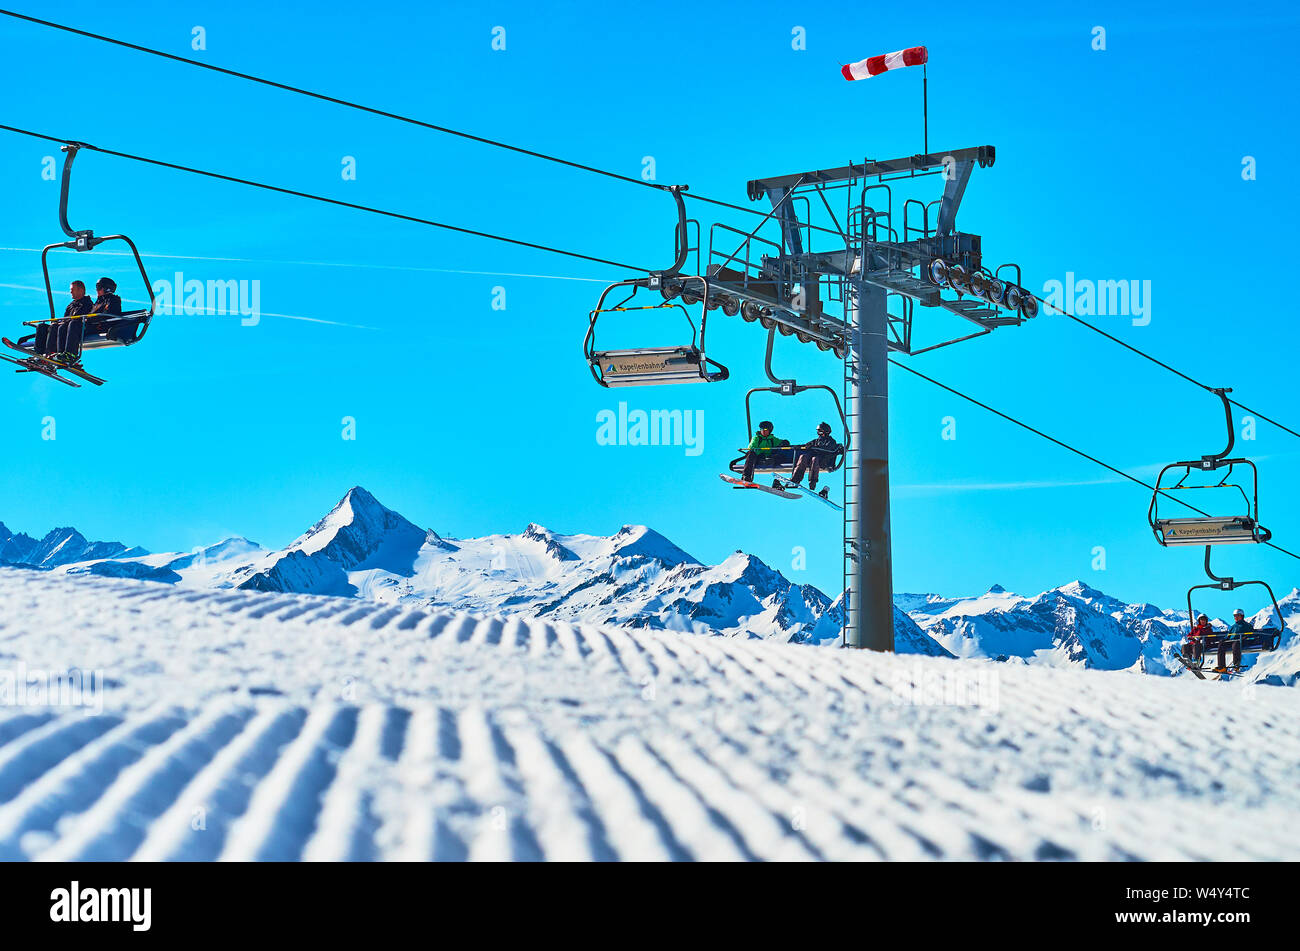 ZELL AM SEE, AUSTRIA - FEBRUARY 28, 2019: The tower and chairs of Kapellenbahn ski lift on Schmittenhohe mount with a view on groomed ski run on the f Stock Photo